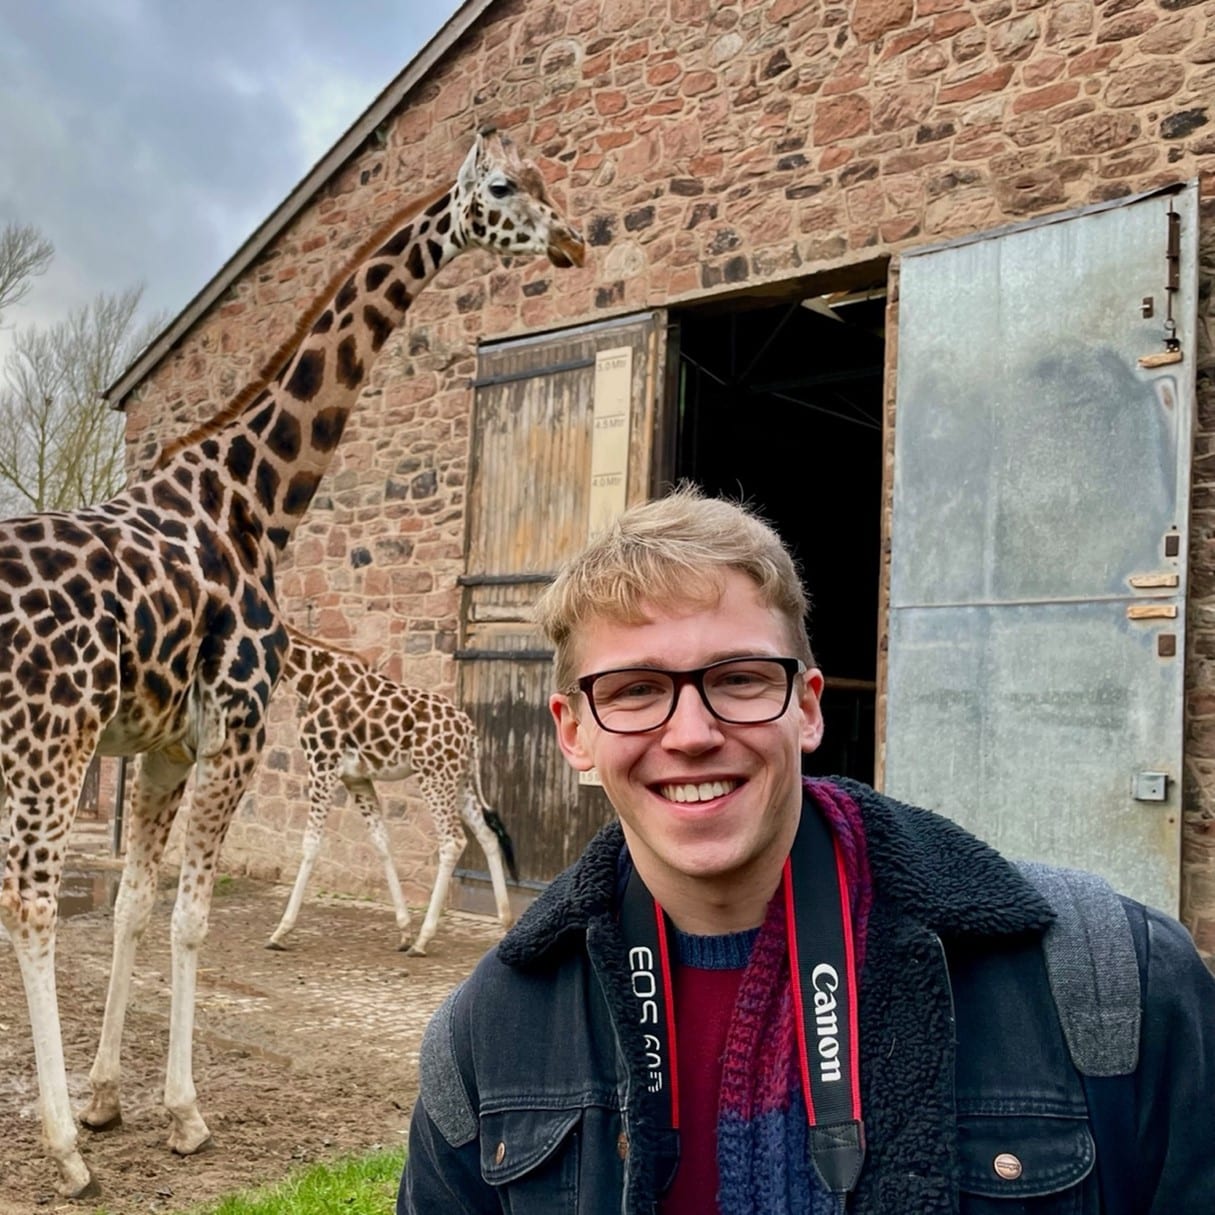 An image of Jack standing in front of two giraffes